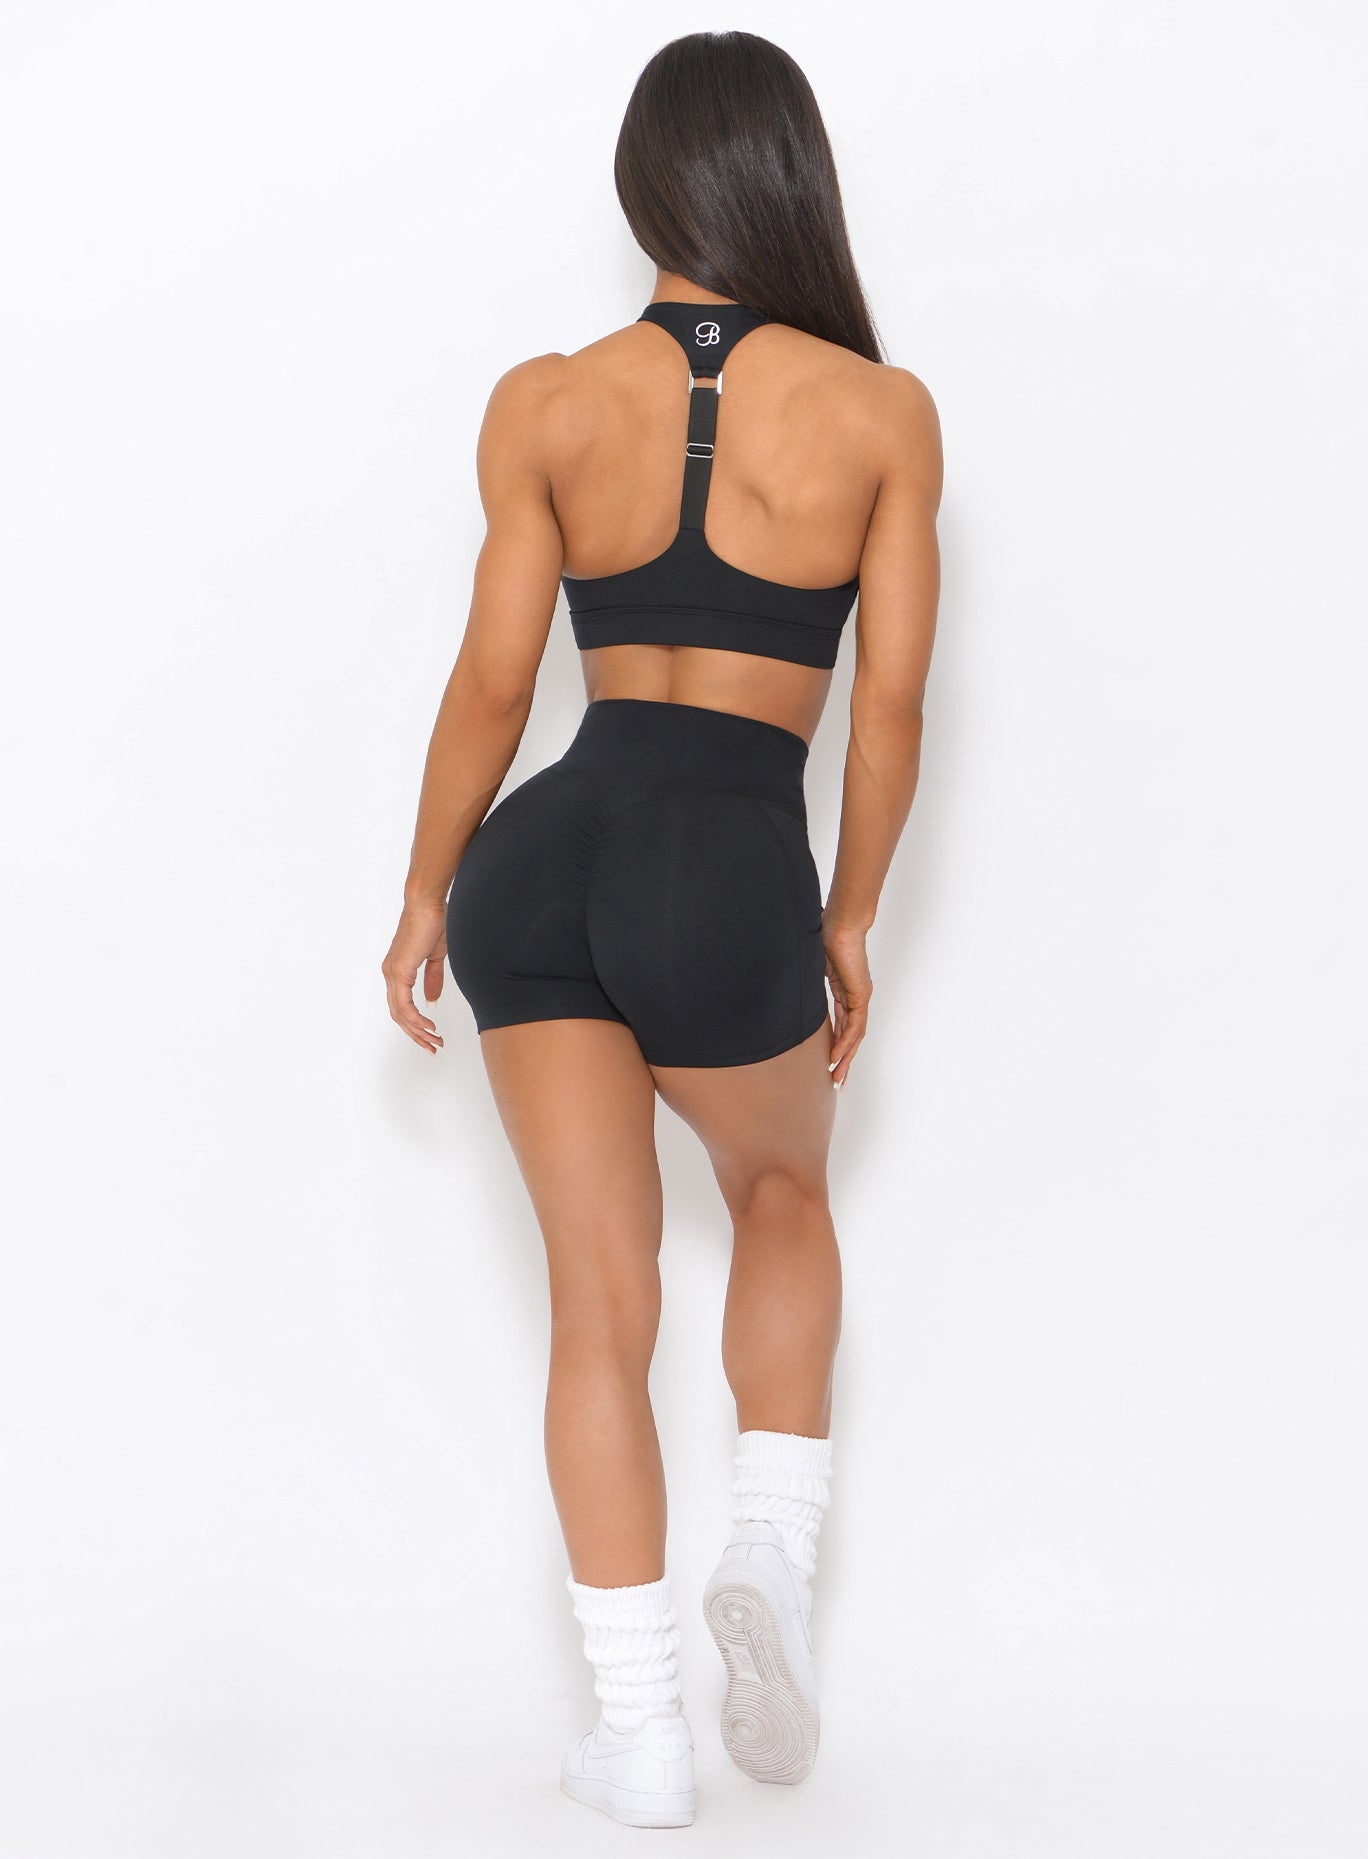 Back view of the model in our black tiny waist shorts and a matching top